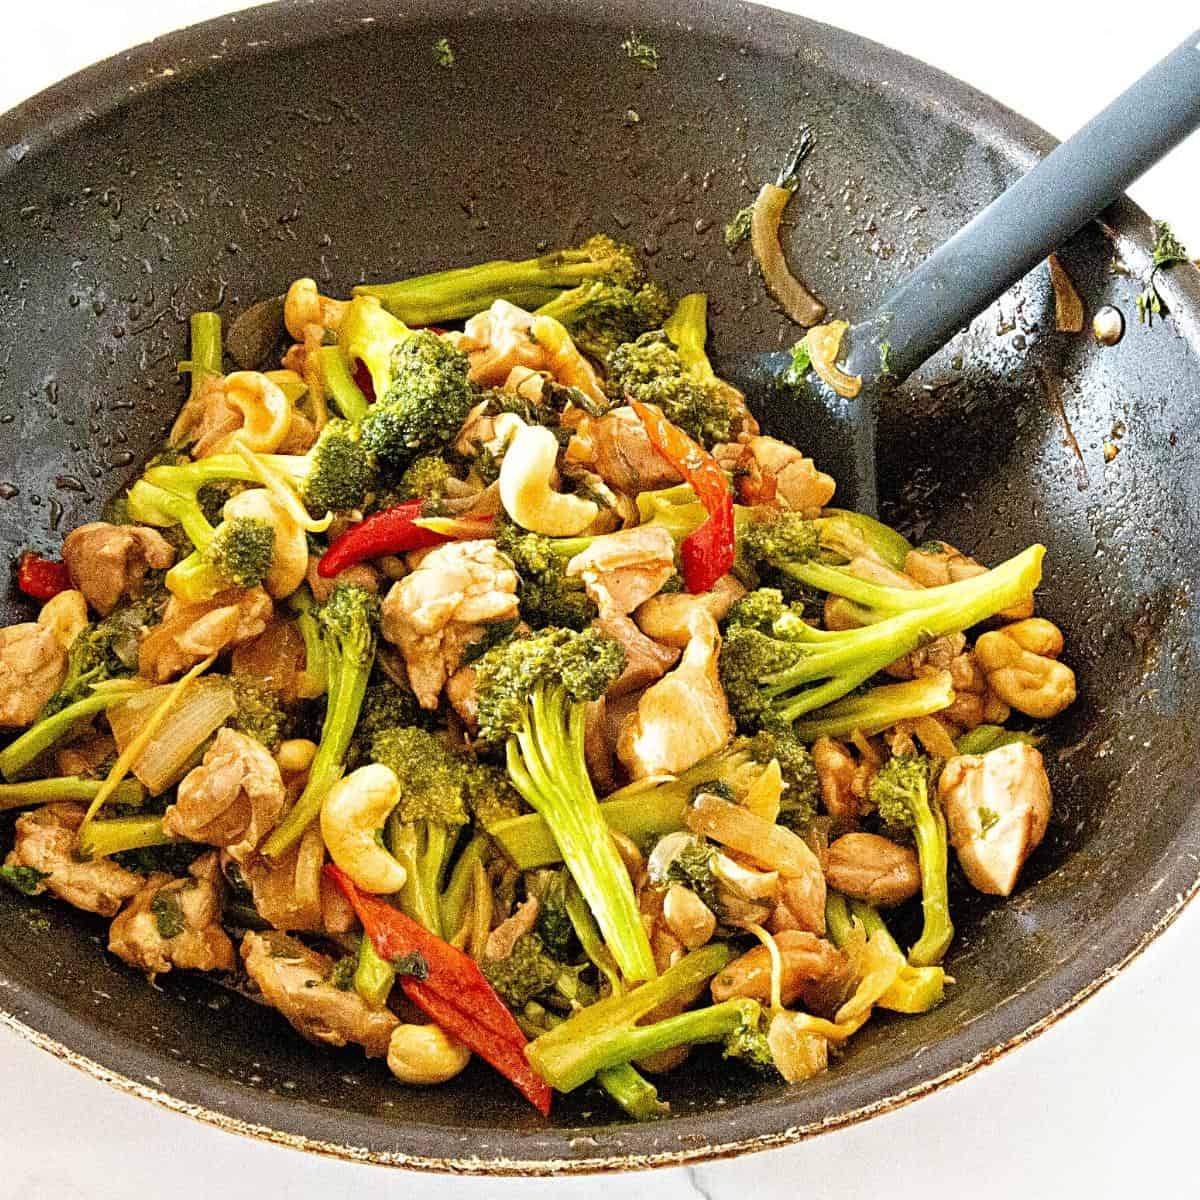 Stir fry in a skillet with broccoli.